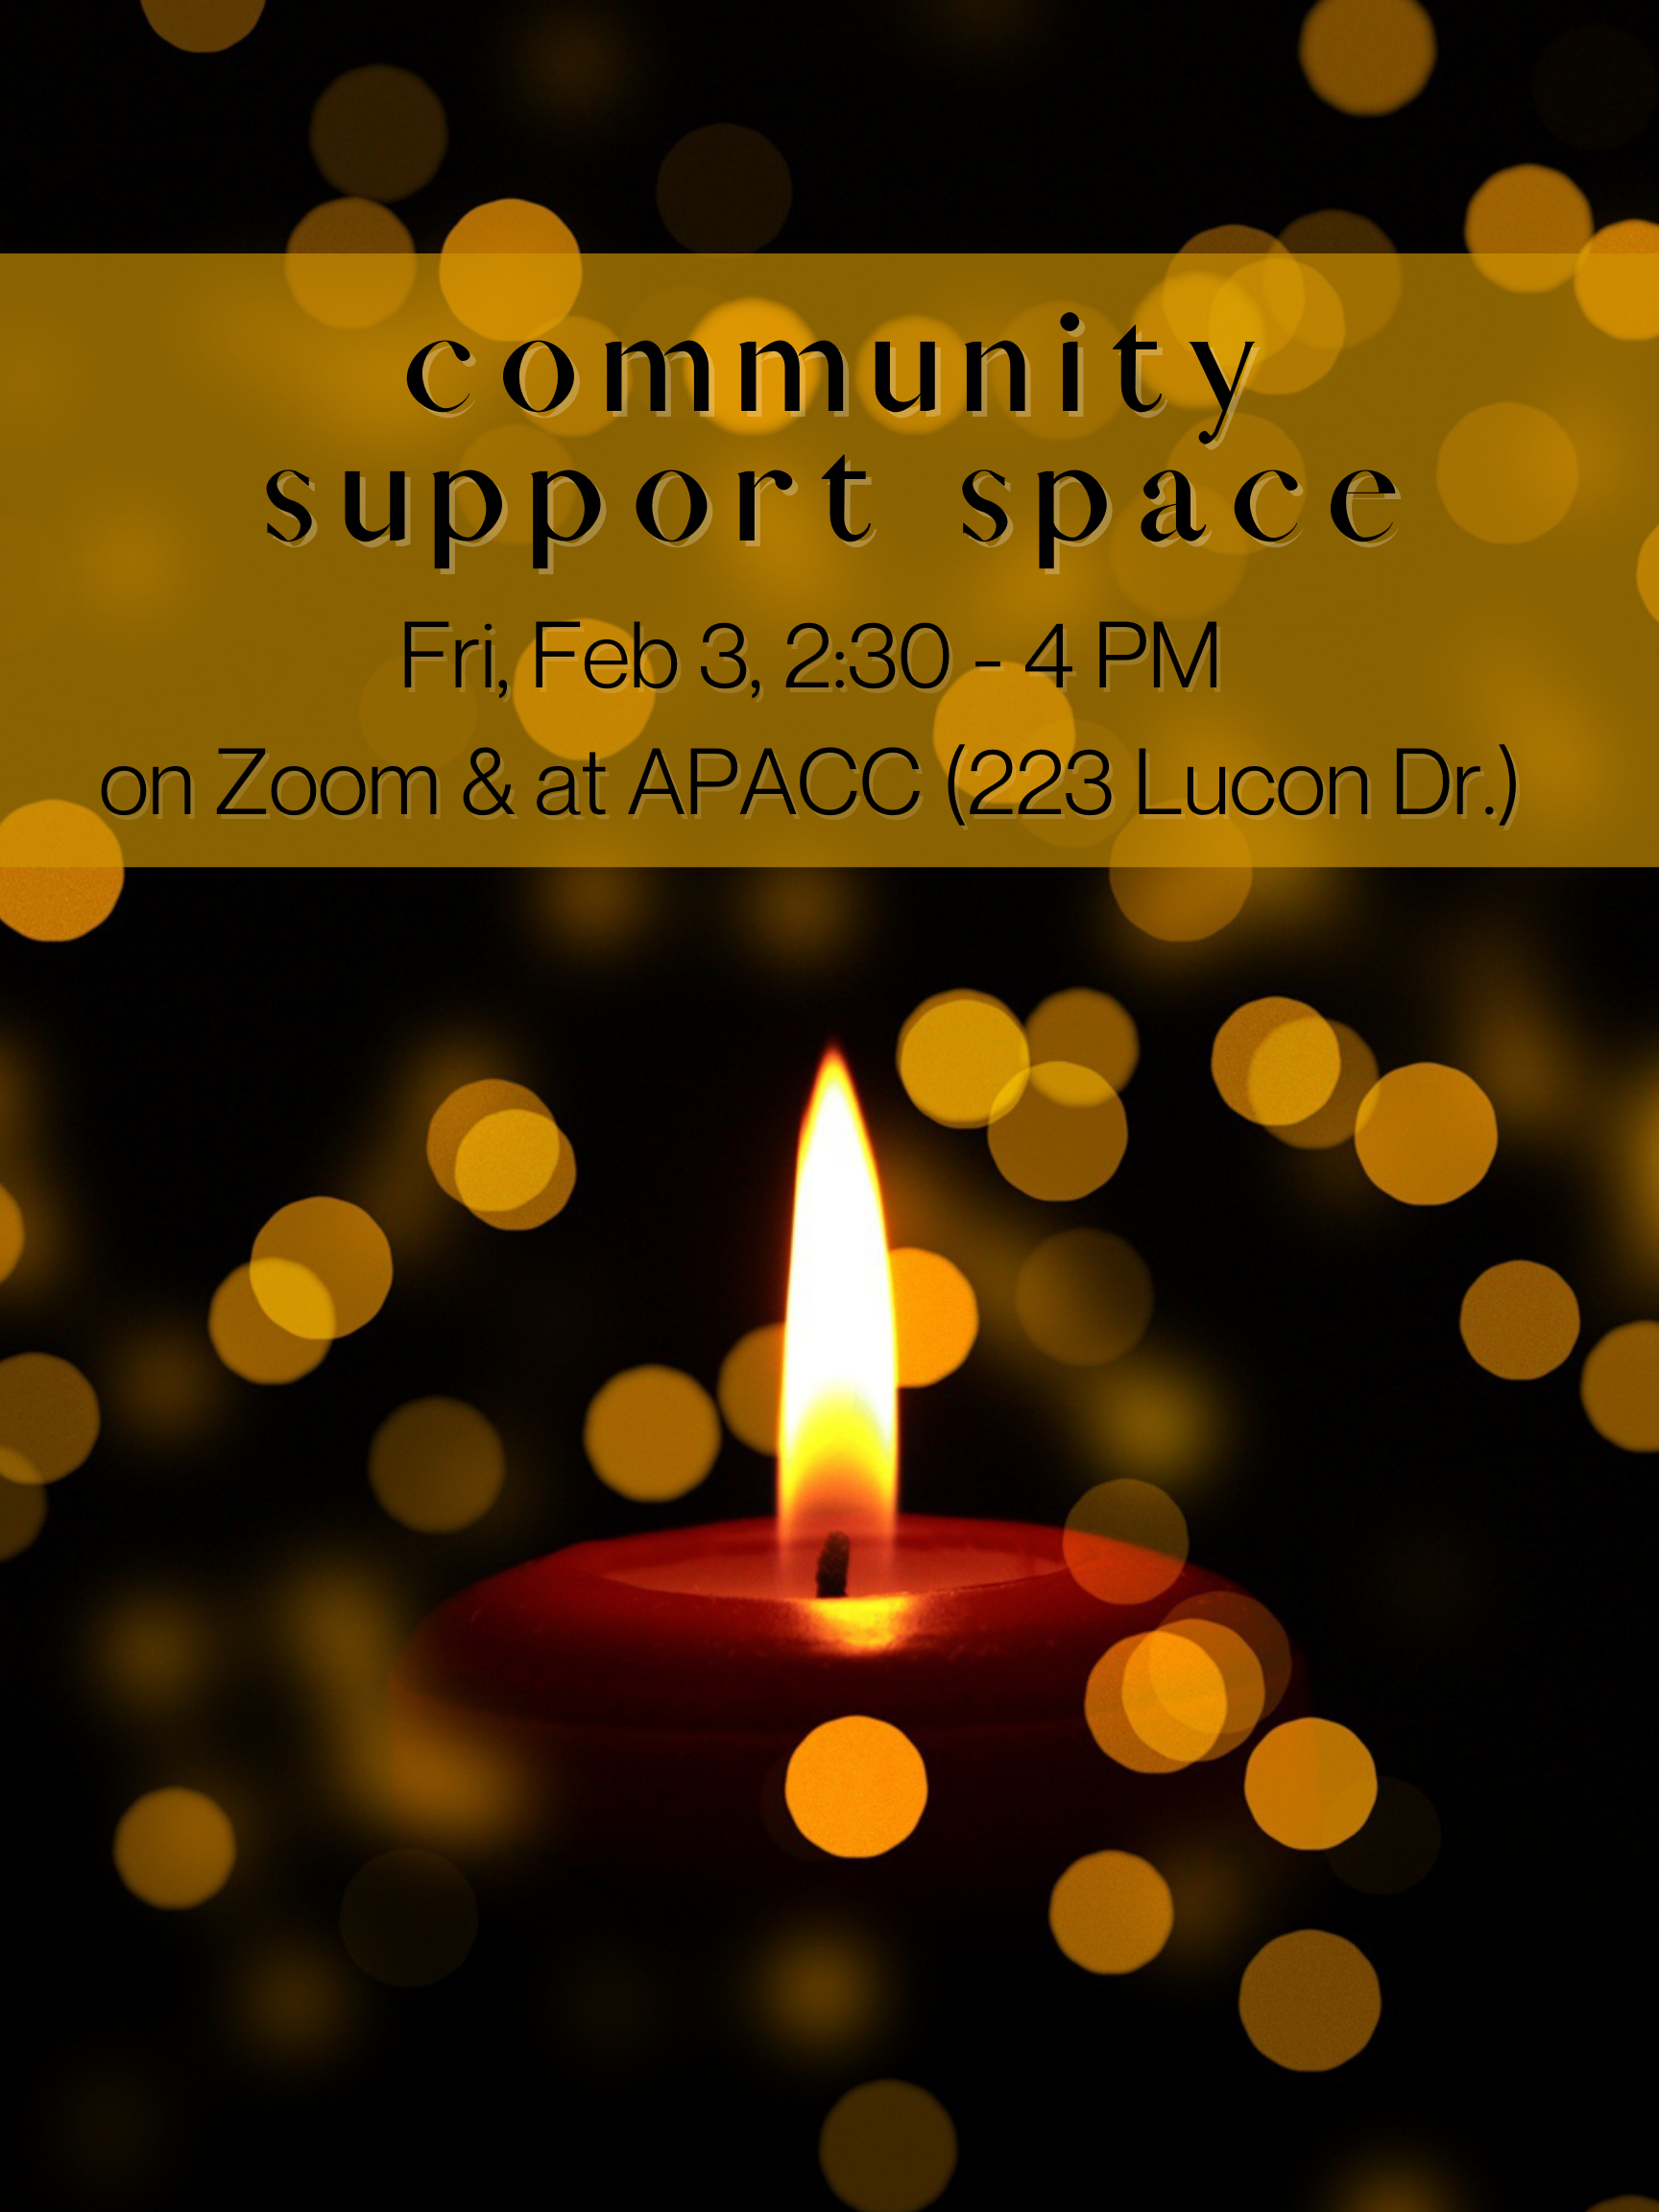 Black rectangle with red candle in center. Yellow box on top has black text that says "community support space. Friday, February 3, 2:30 - 4 PM on Zoom & at APACC (223 Lucon Dr.)"